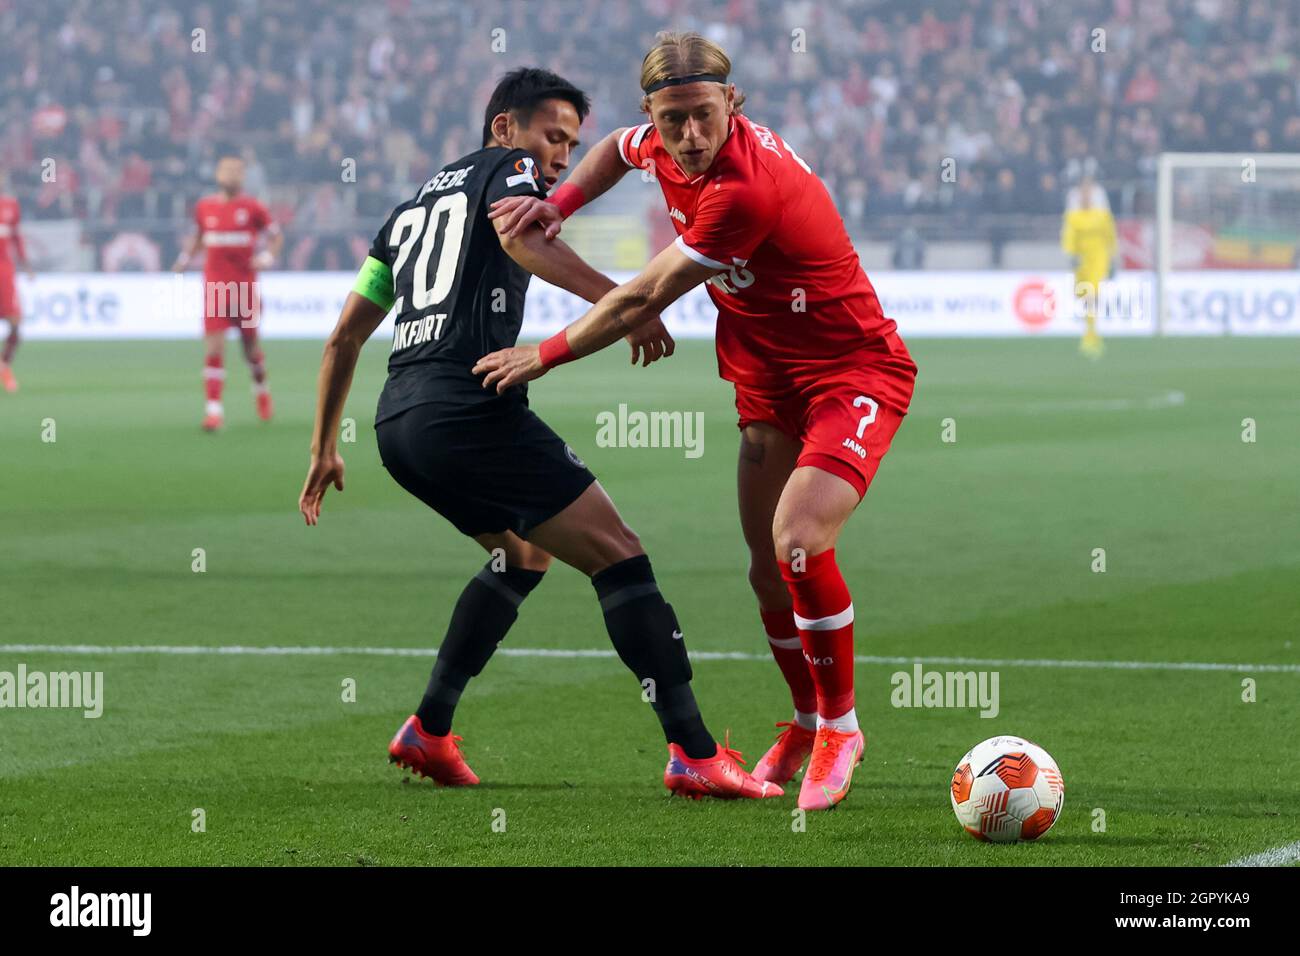 ANTWERP, BELGIUM - SEPTEMBER 30: Makoto Hasebe of Eintracht Frankfurt and Viktor Fischer of Royal Antwerp FC battle for possession during the UEFA Europa League Group Stage match between Royal Antwerp FC and Eintracht Frankfurt at the Bosuil on September 30, 2021 in Antwerp, Belgium (Photo by Herman Dingler/Orange Pictures) Stock Photo